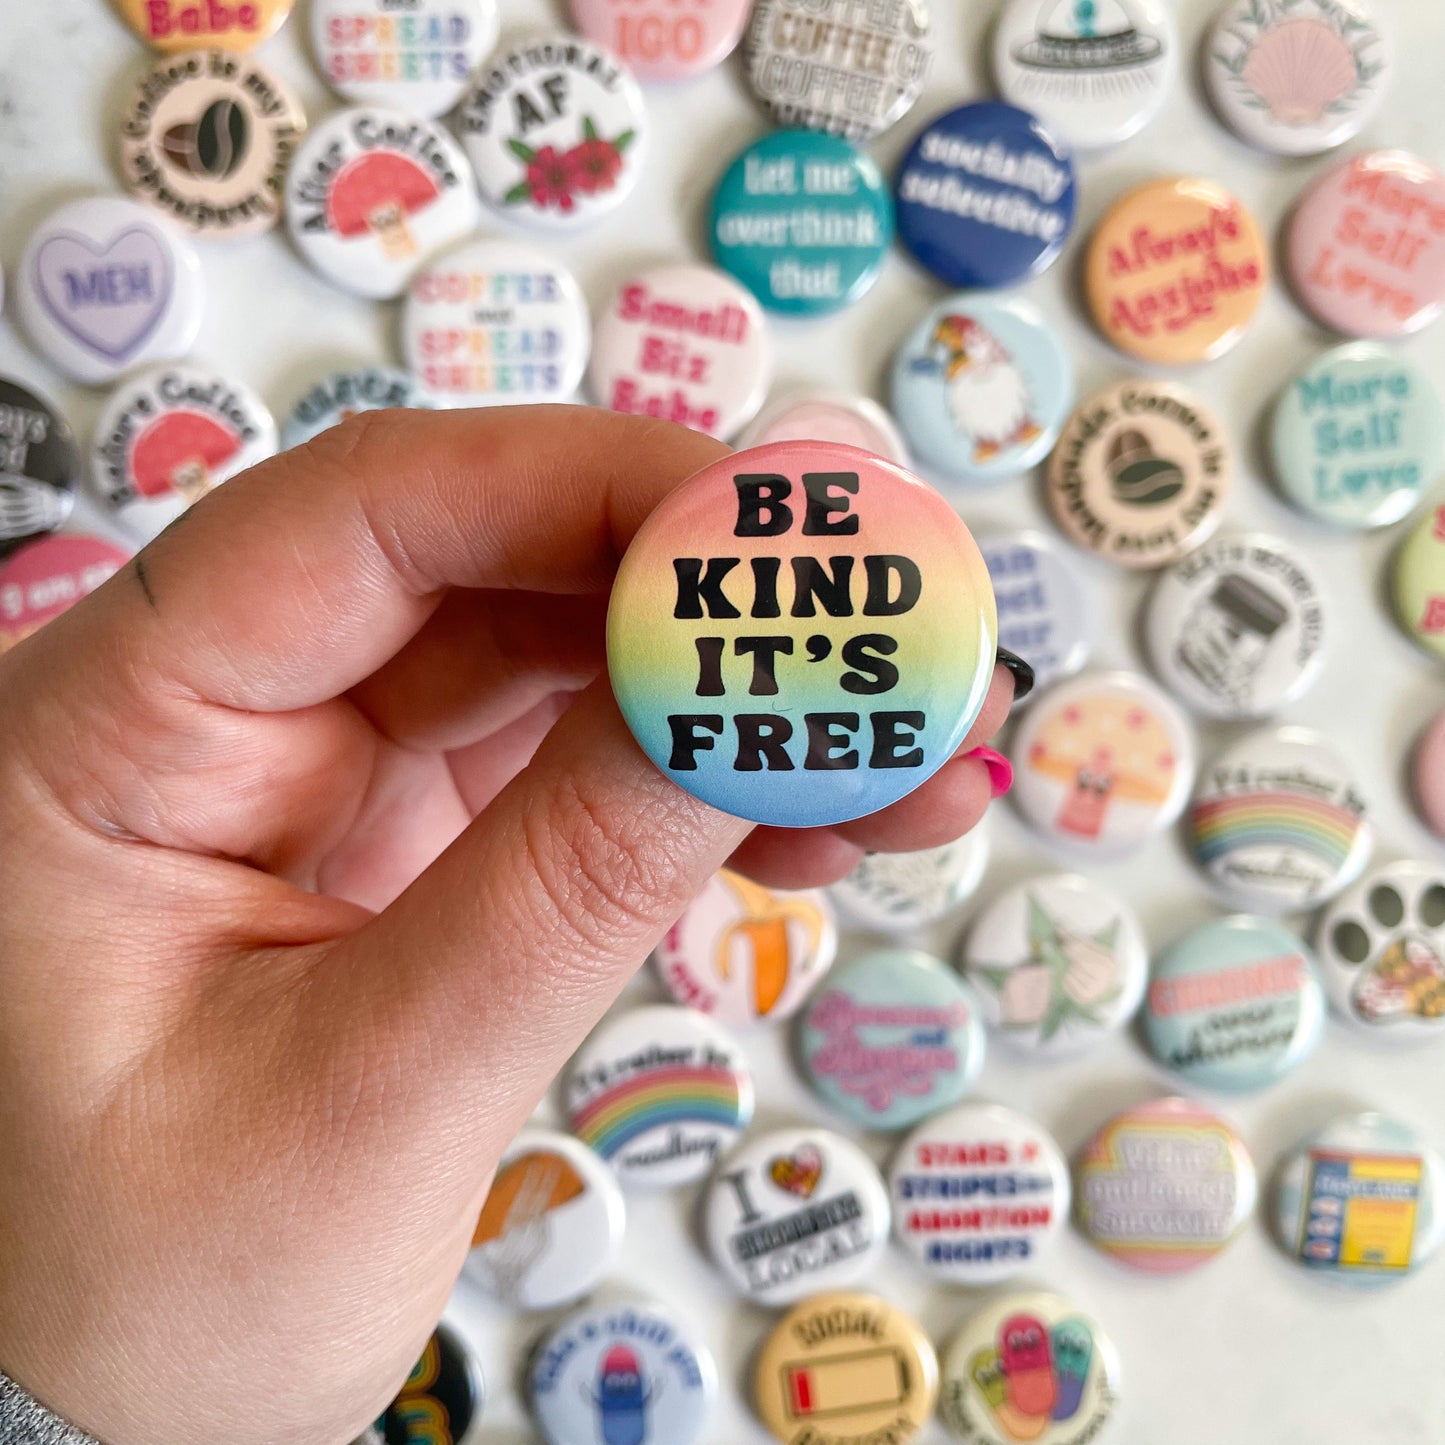 Be Kind It's Free Rainbow Button / Badge (Buy 4 Get 1 FREE)